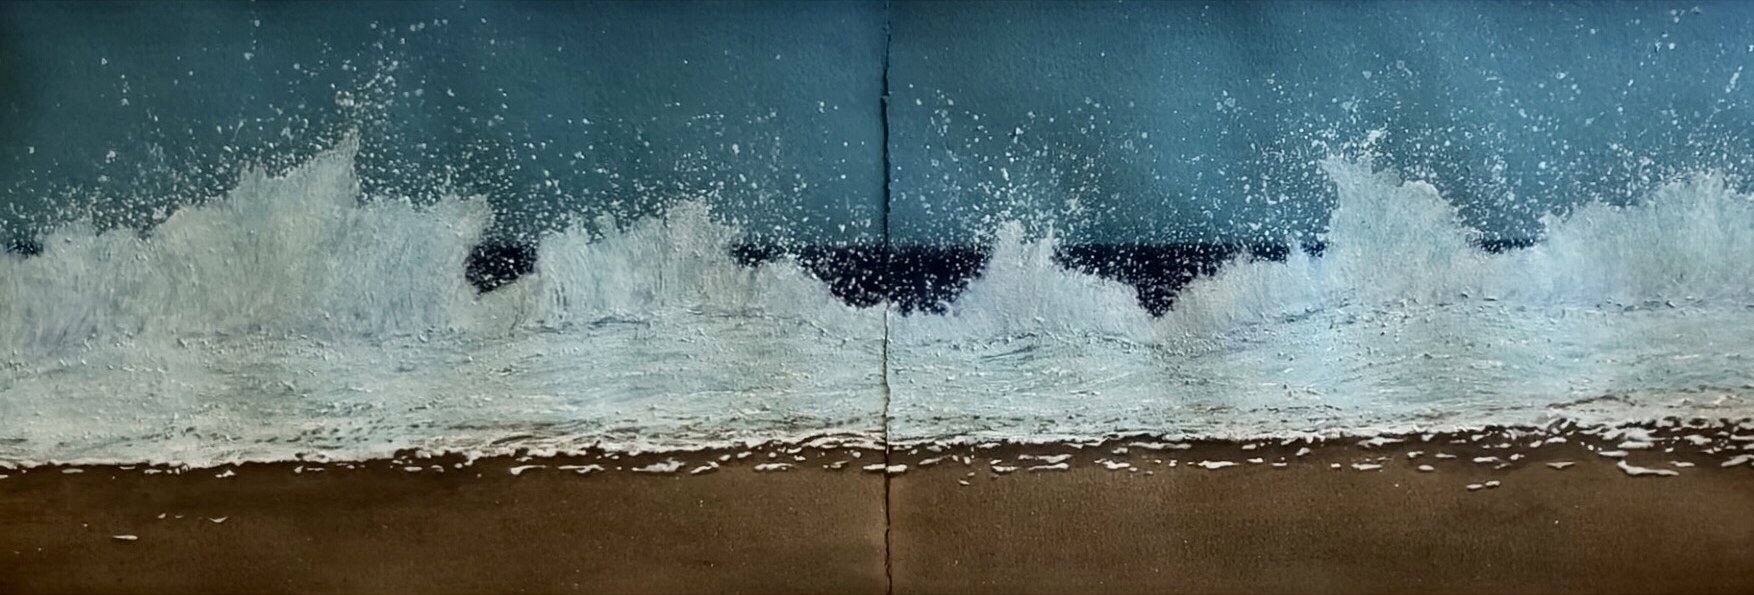 WAVES 13A - LG Brosterman is a Mixed Media Artist based in Tribeca 